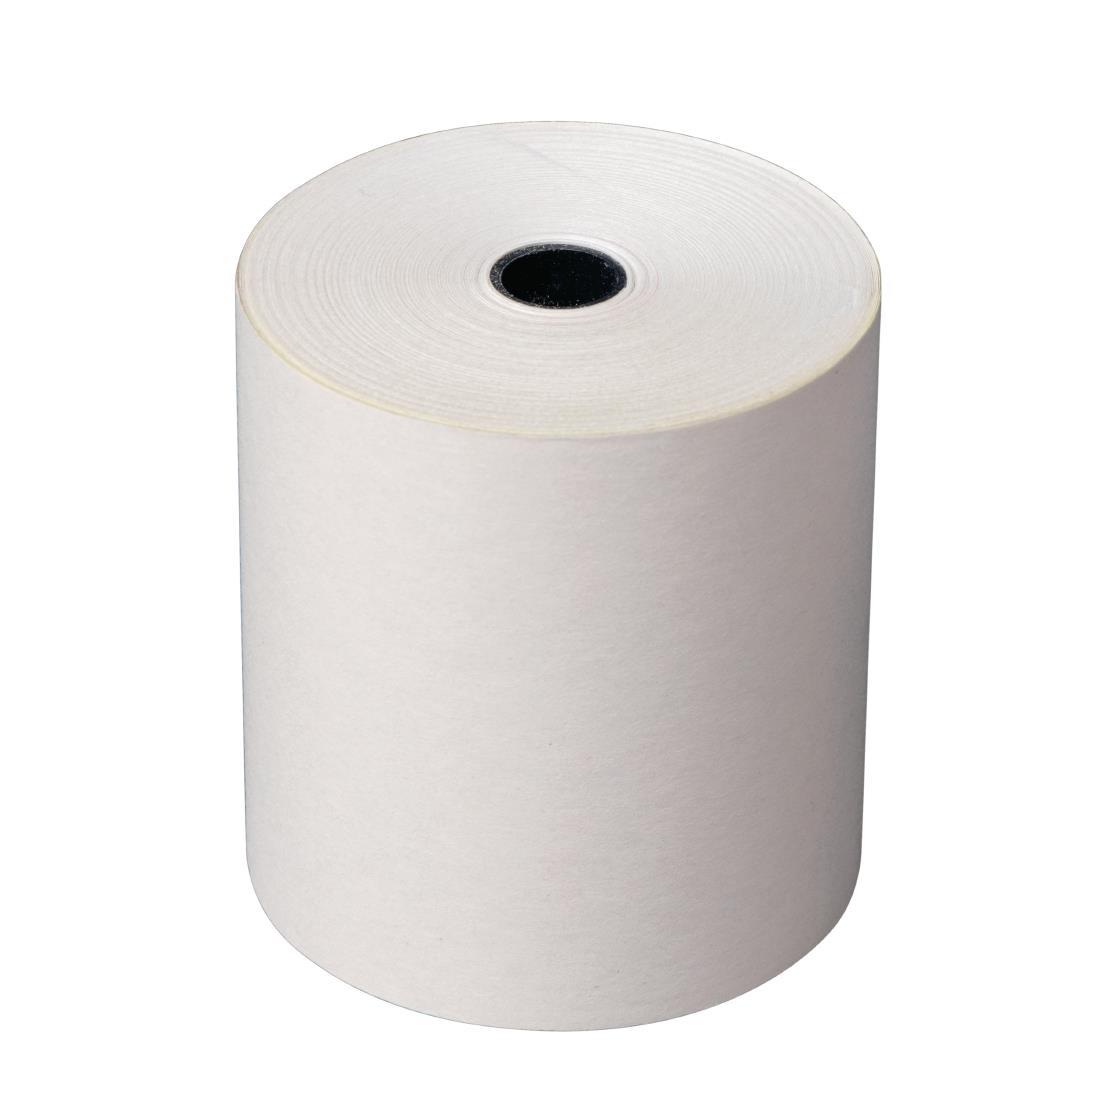 Fiesta Non-Thermal 2ply White and Yellow Till Roll 76 x 70mm (Pack of 20) - DK596  - 4